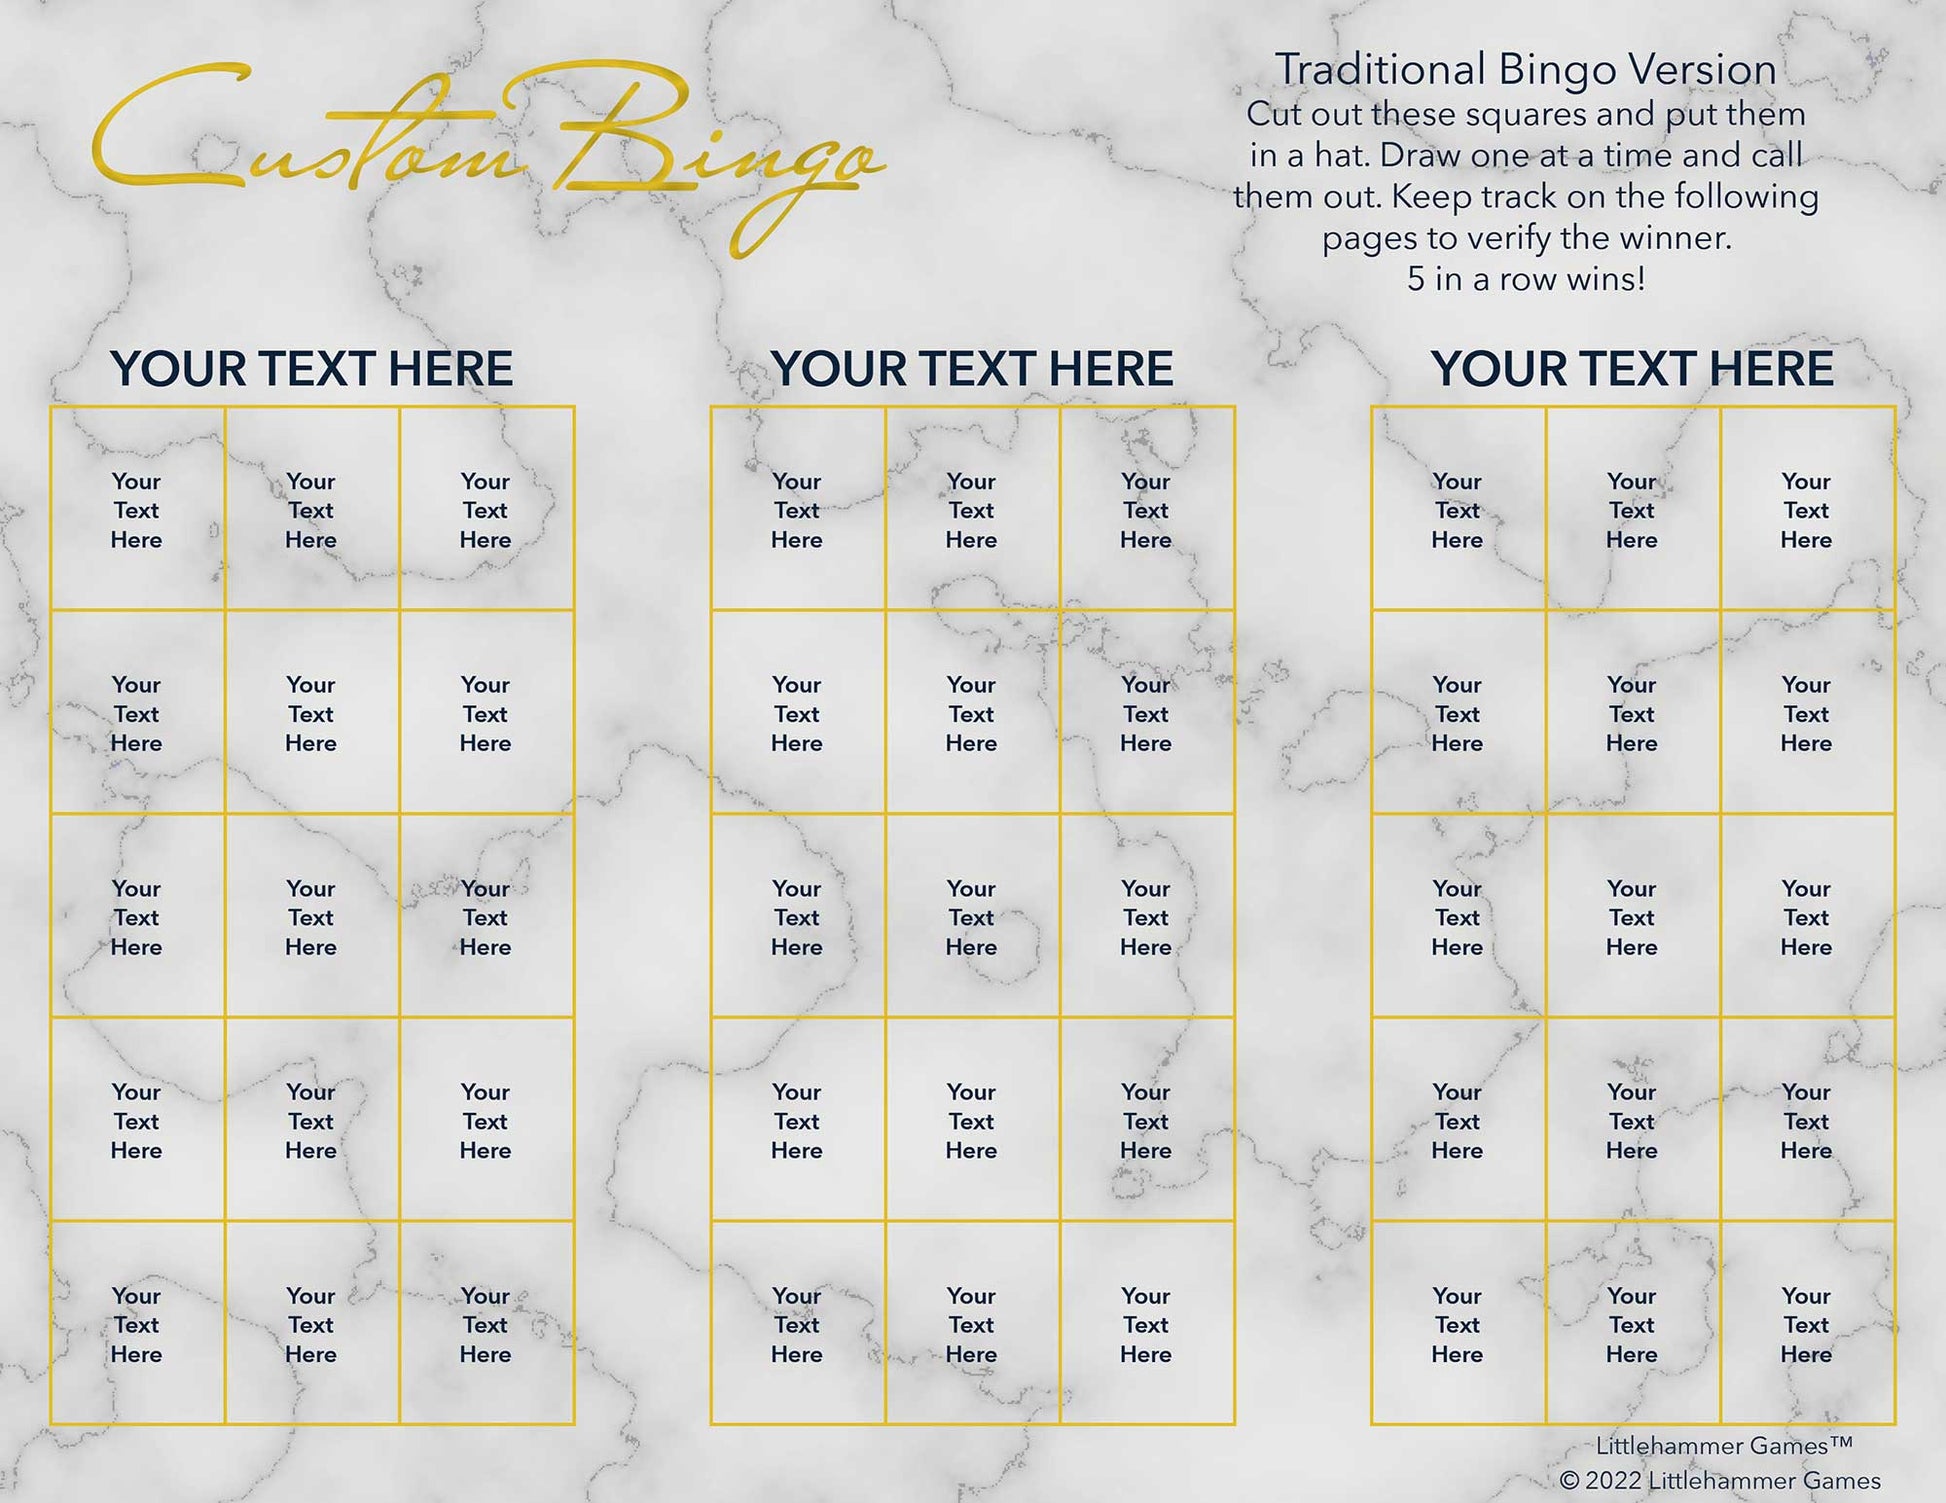 Custom Bingo calling card with gold text on a marble background